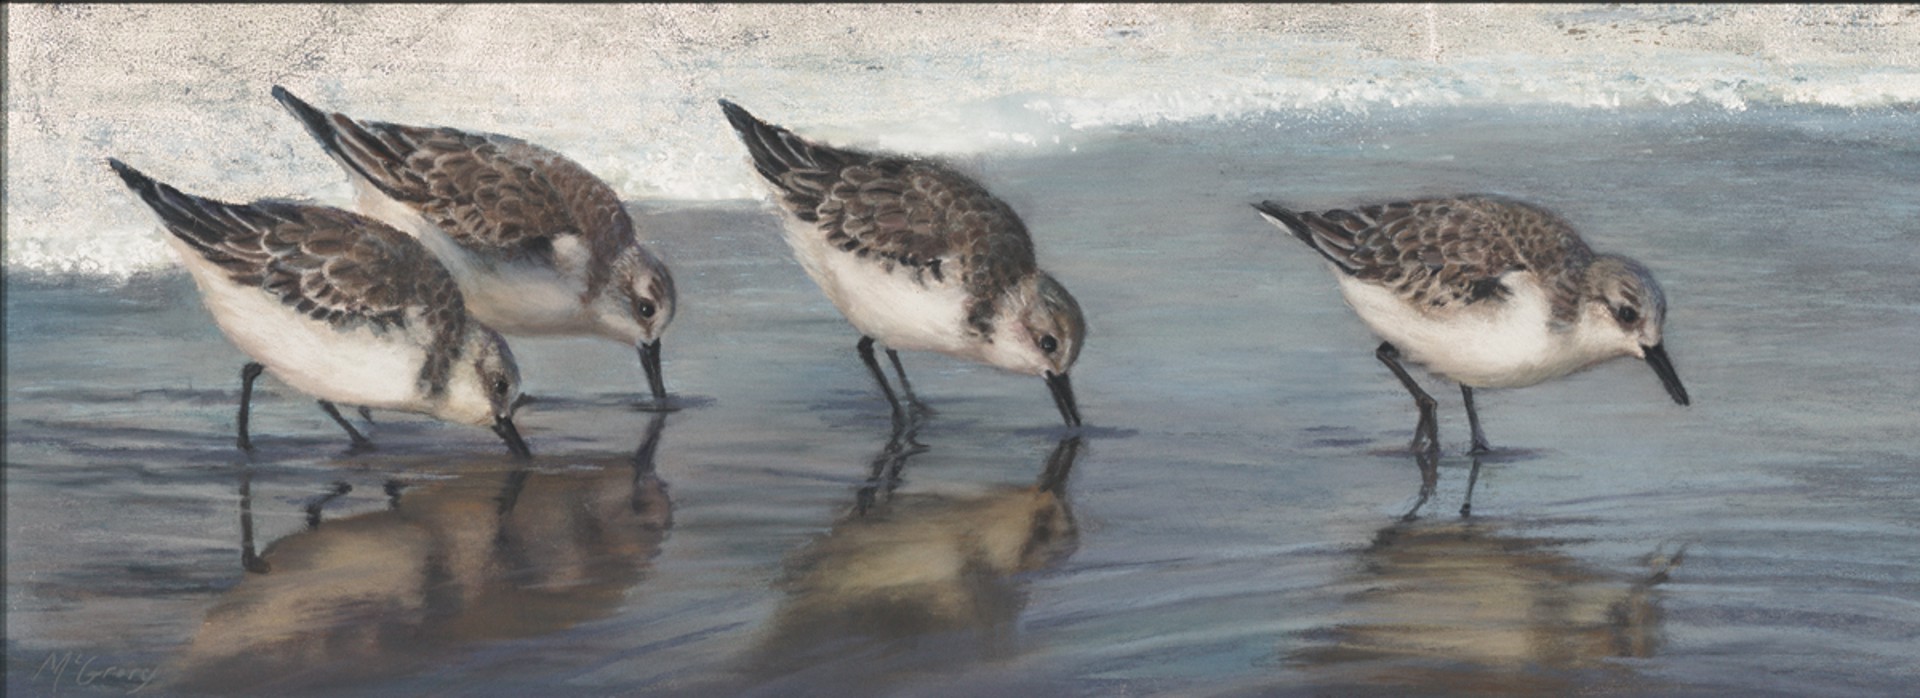 Four on the Beach by Anne McGrory